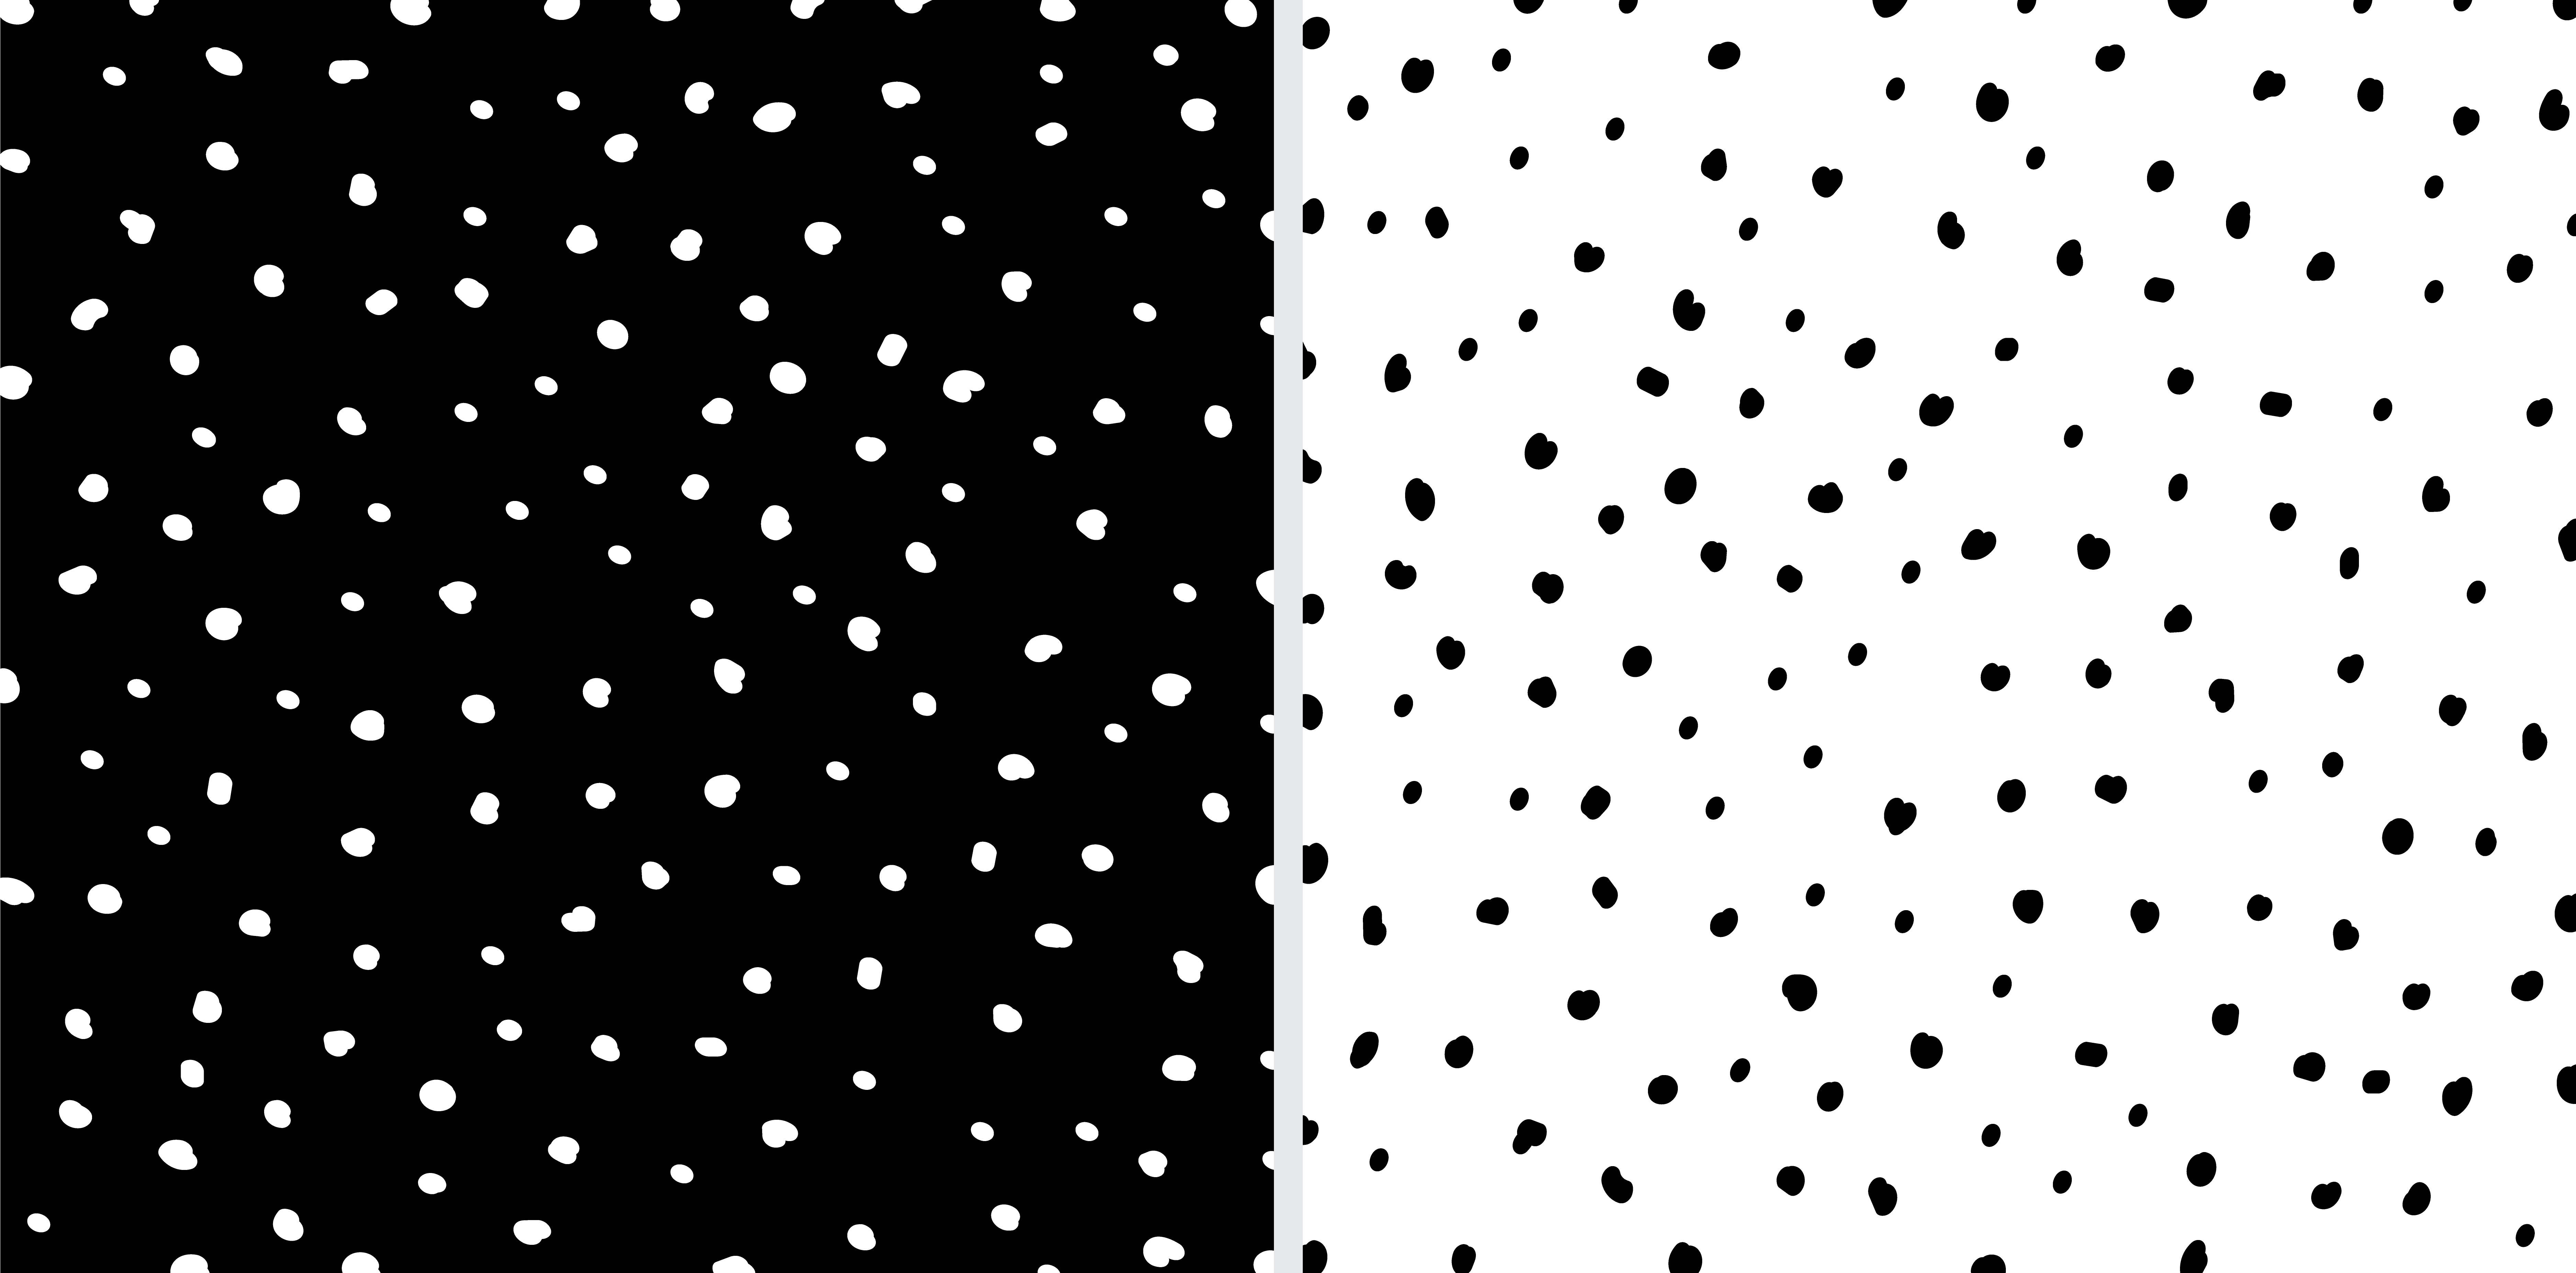 Set of Irregular black and white dots pattern background. Sketchy hand